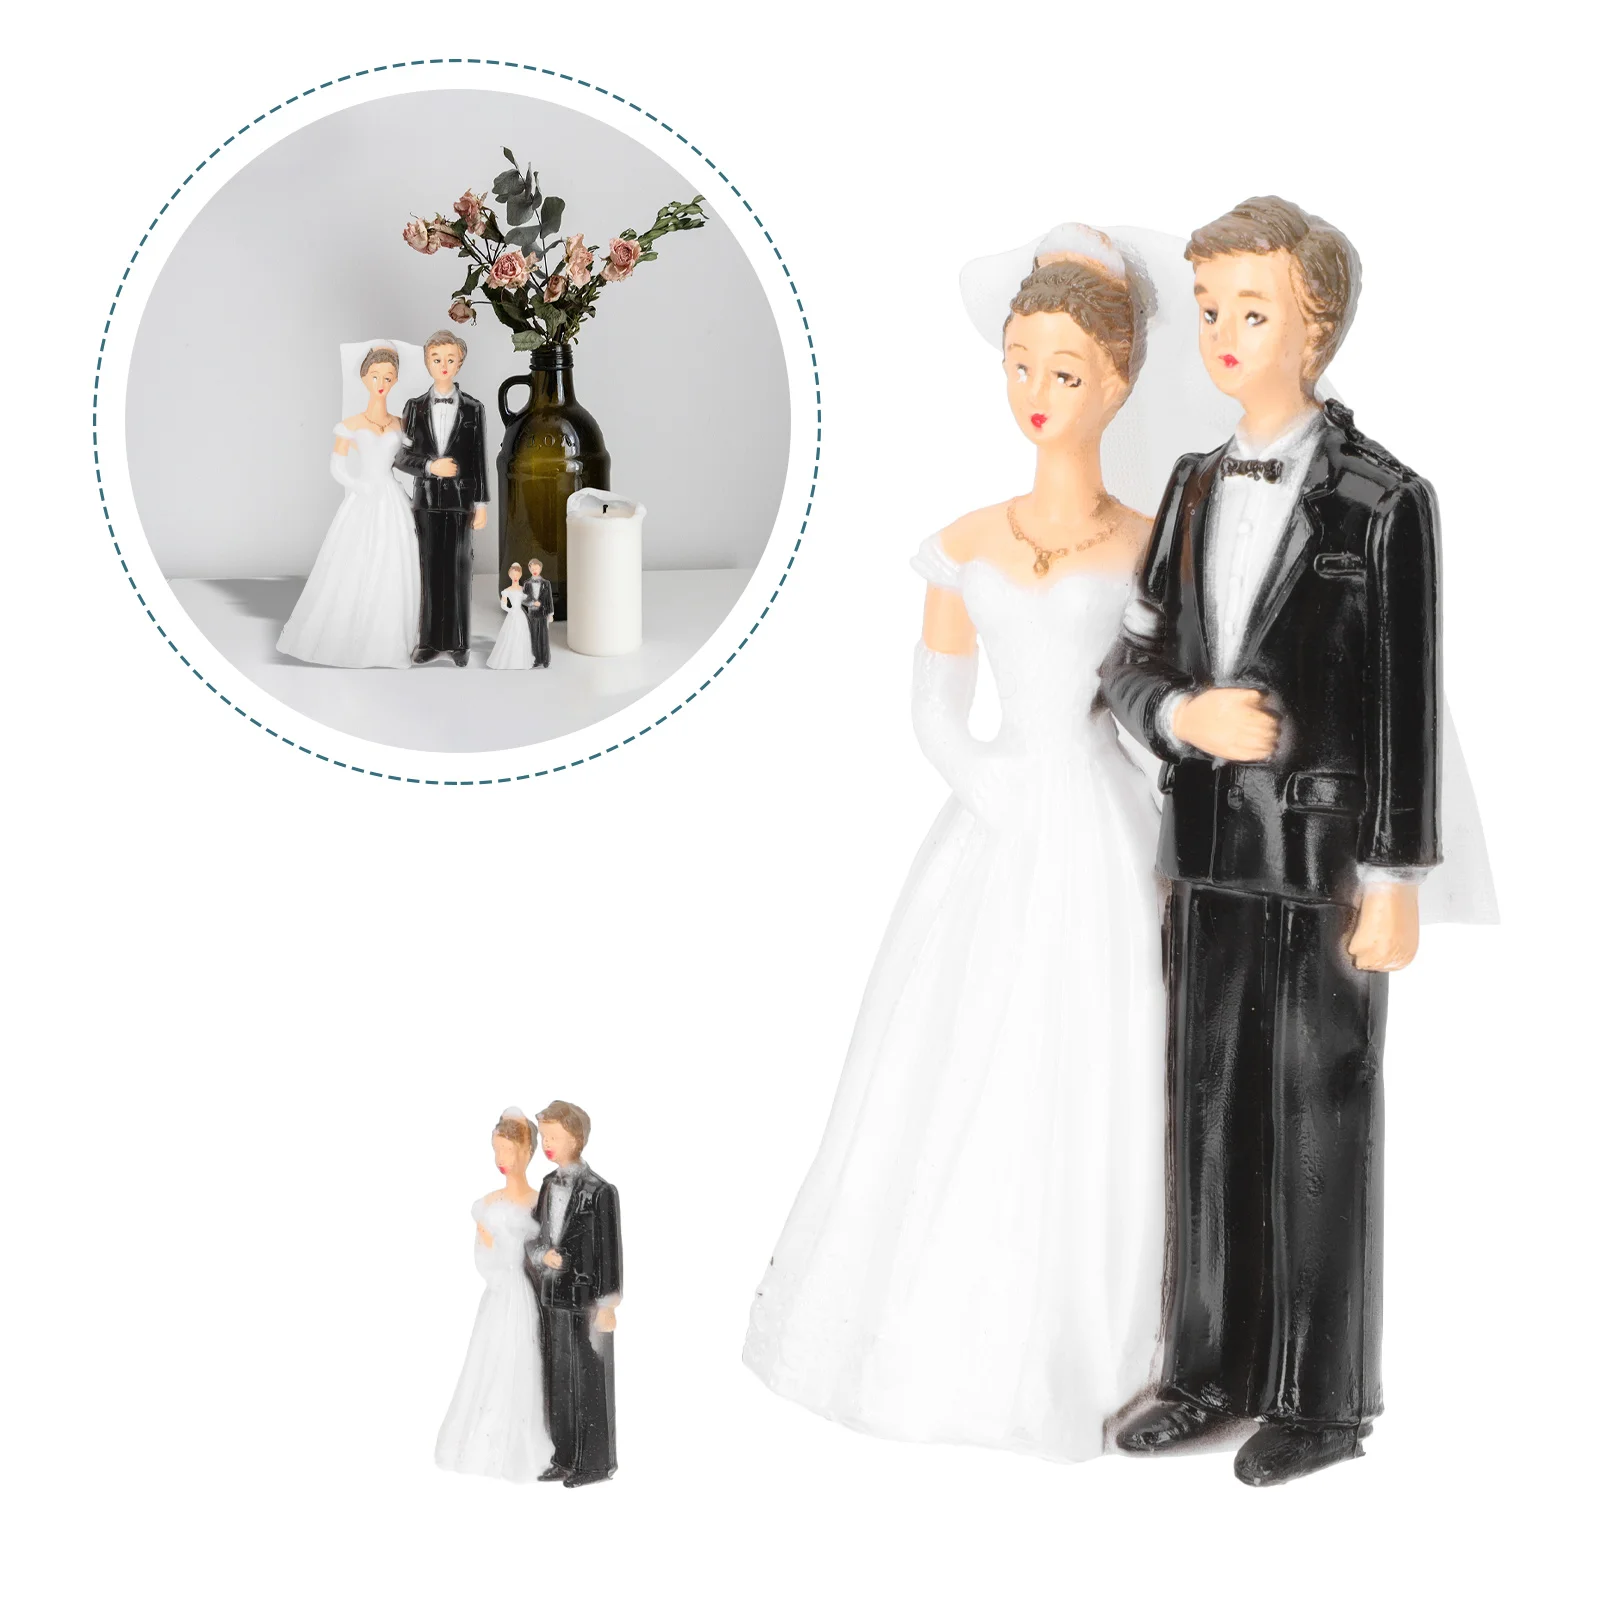 

6 Pcs Bridegroom Statue Engagement Gift Gifts Couples Statues Home Decor Resin Table Decorations Living Lovers